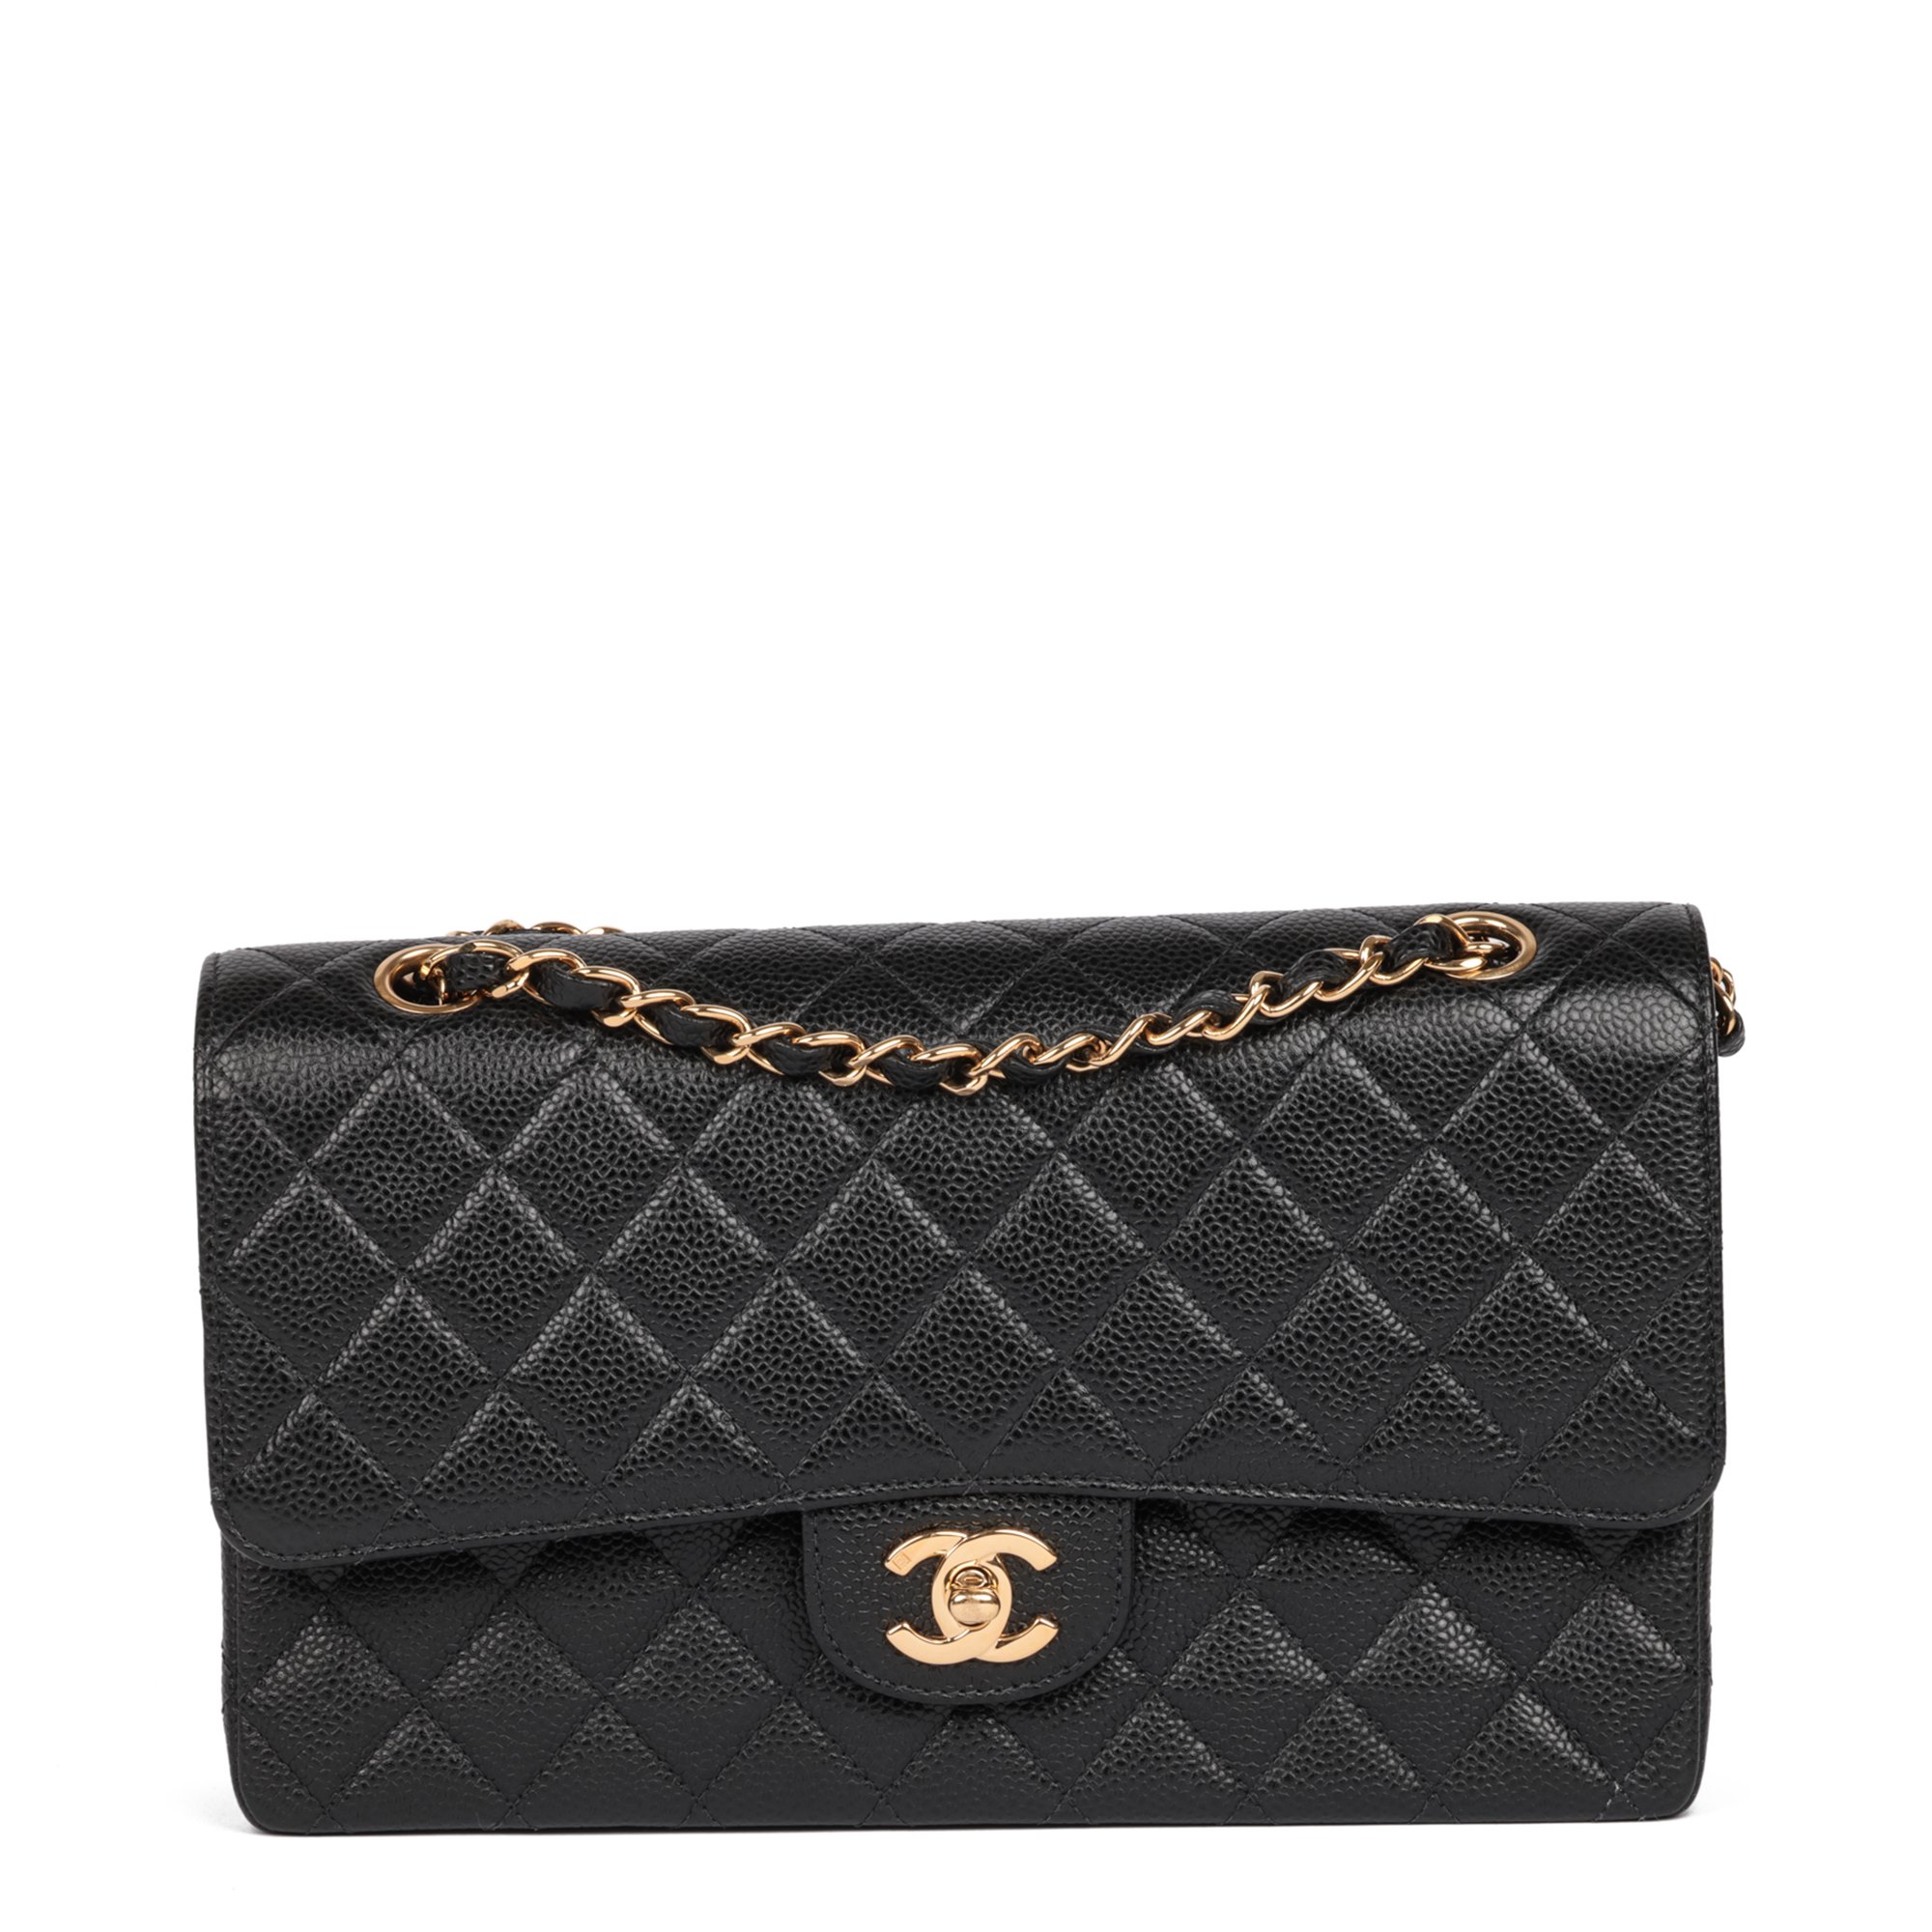 Chanel Black Quilted Caviar Leather Vintage Classic Double Flap Bag